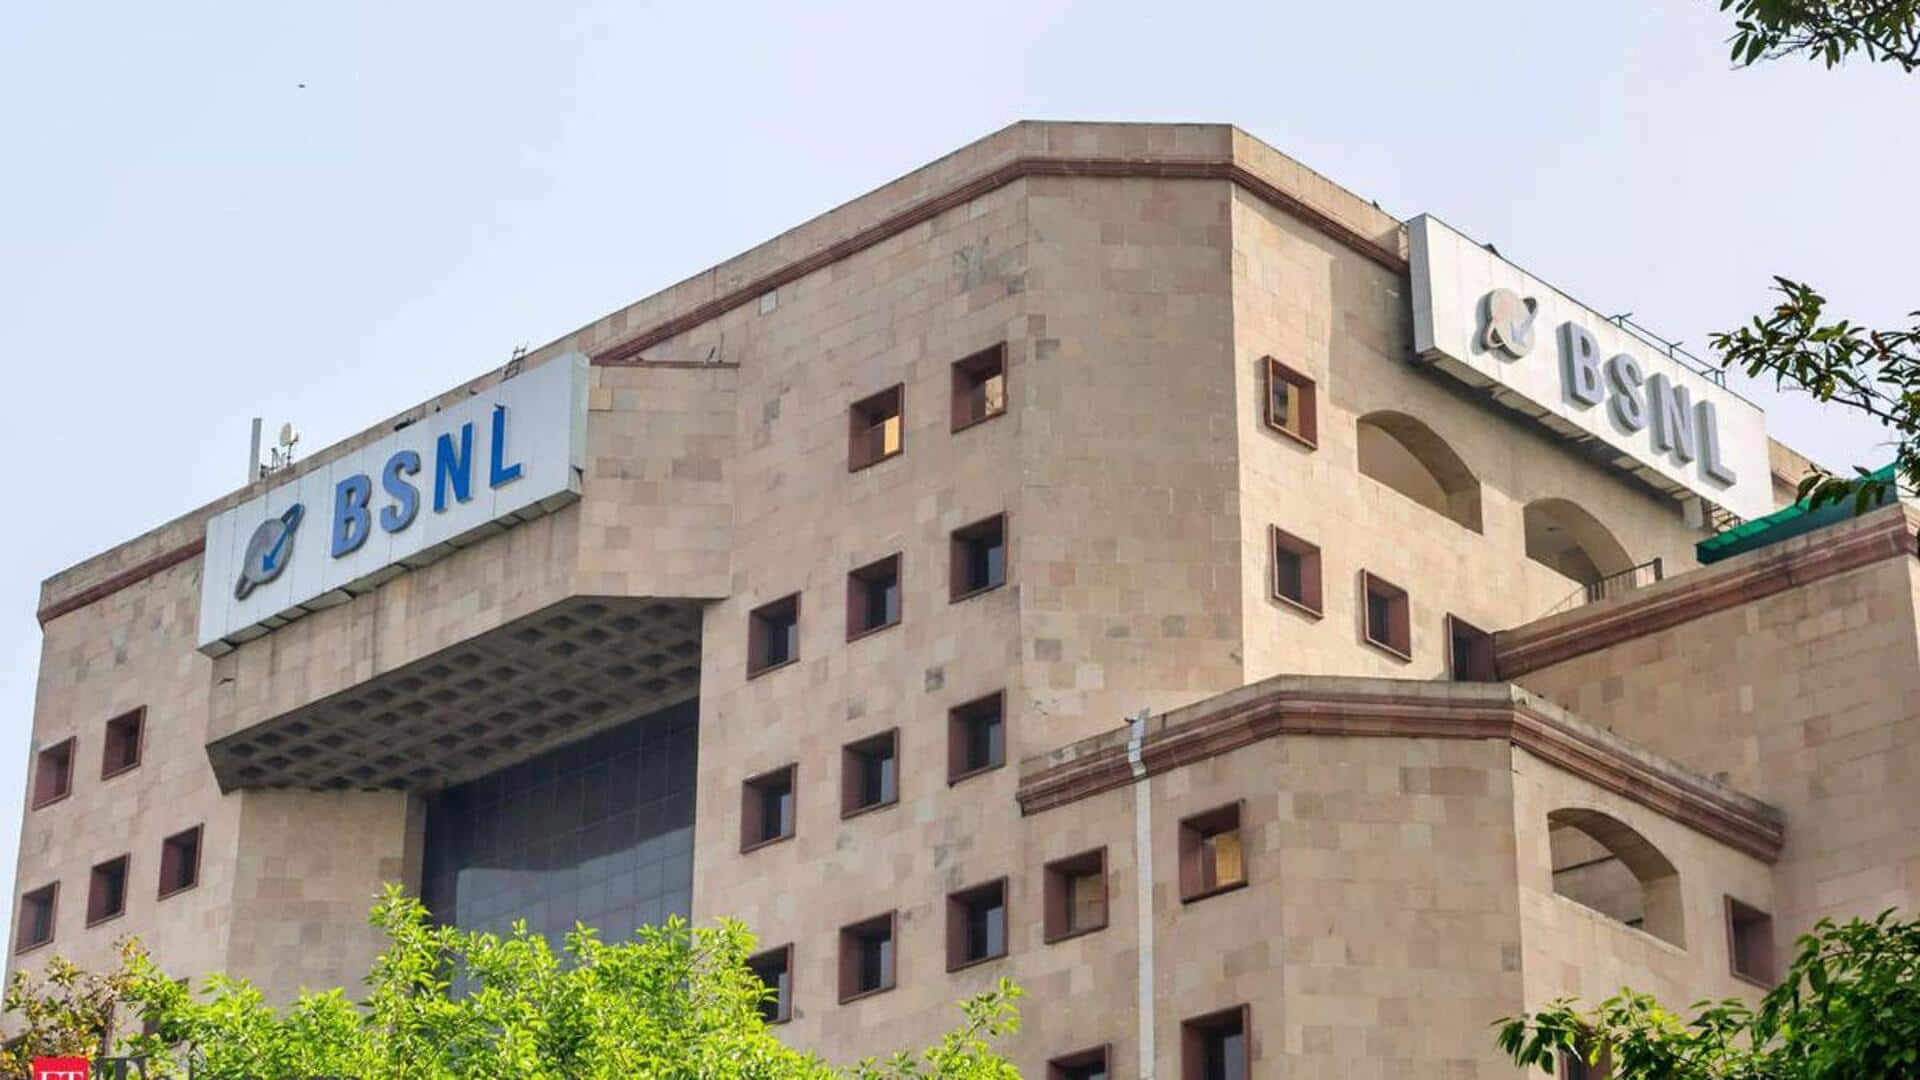 BSNL will launch 4G services across India in August